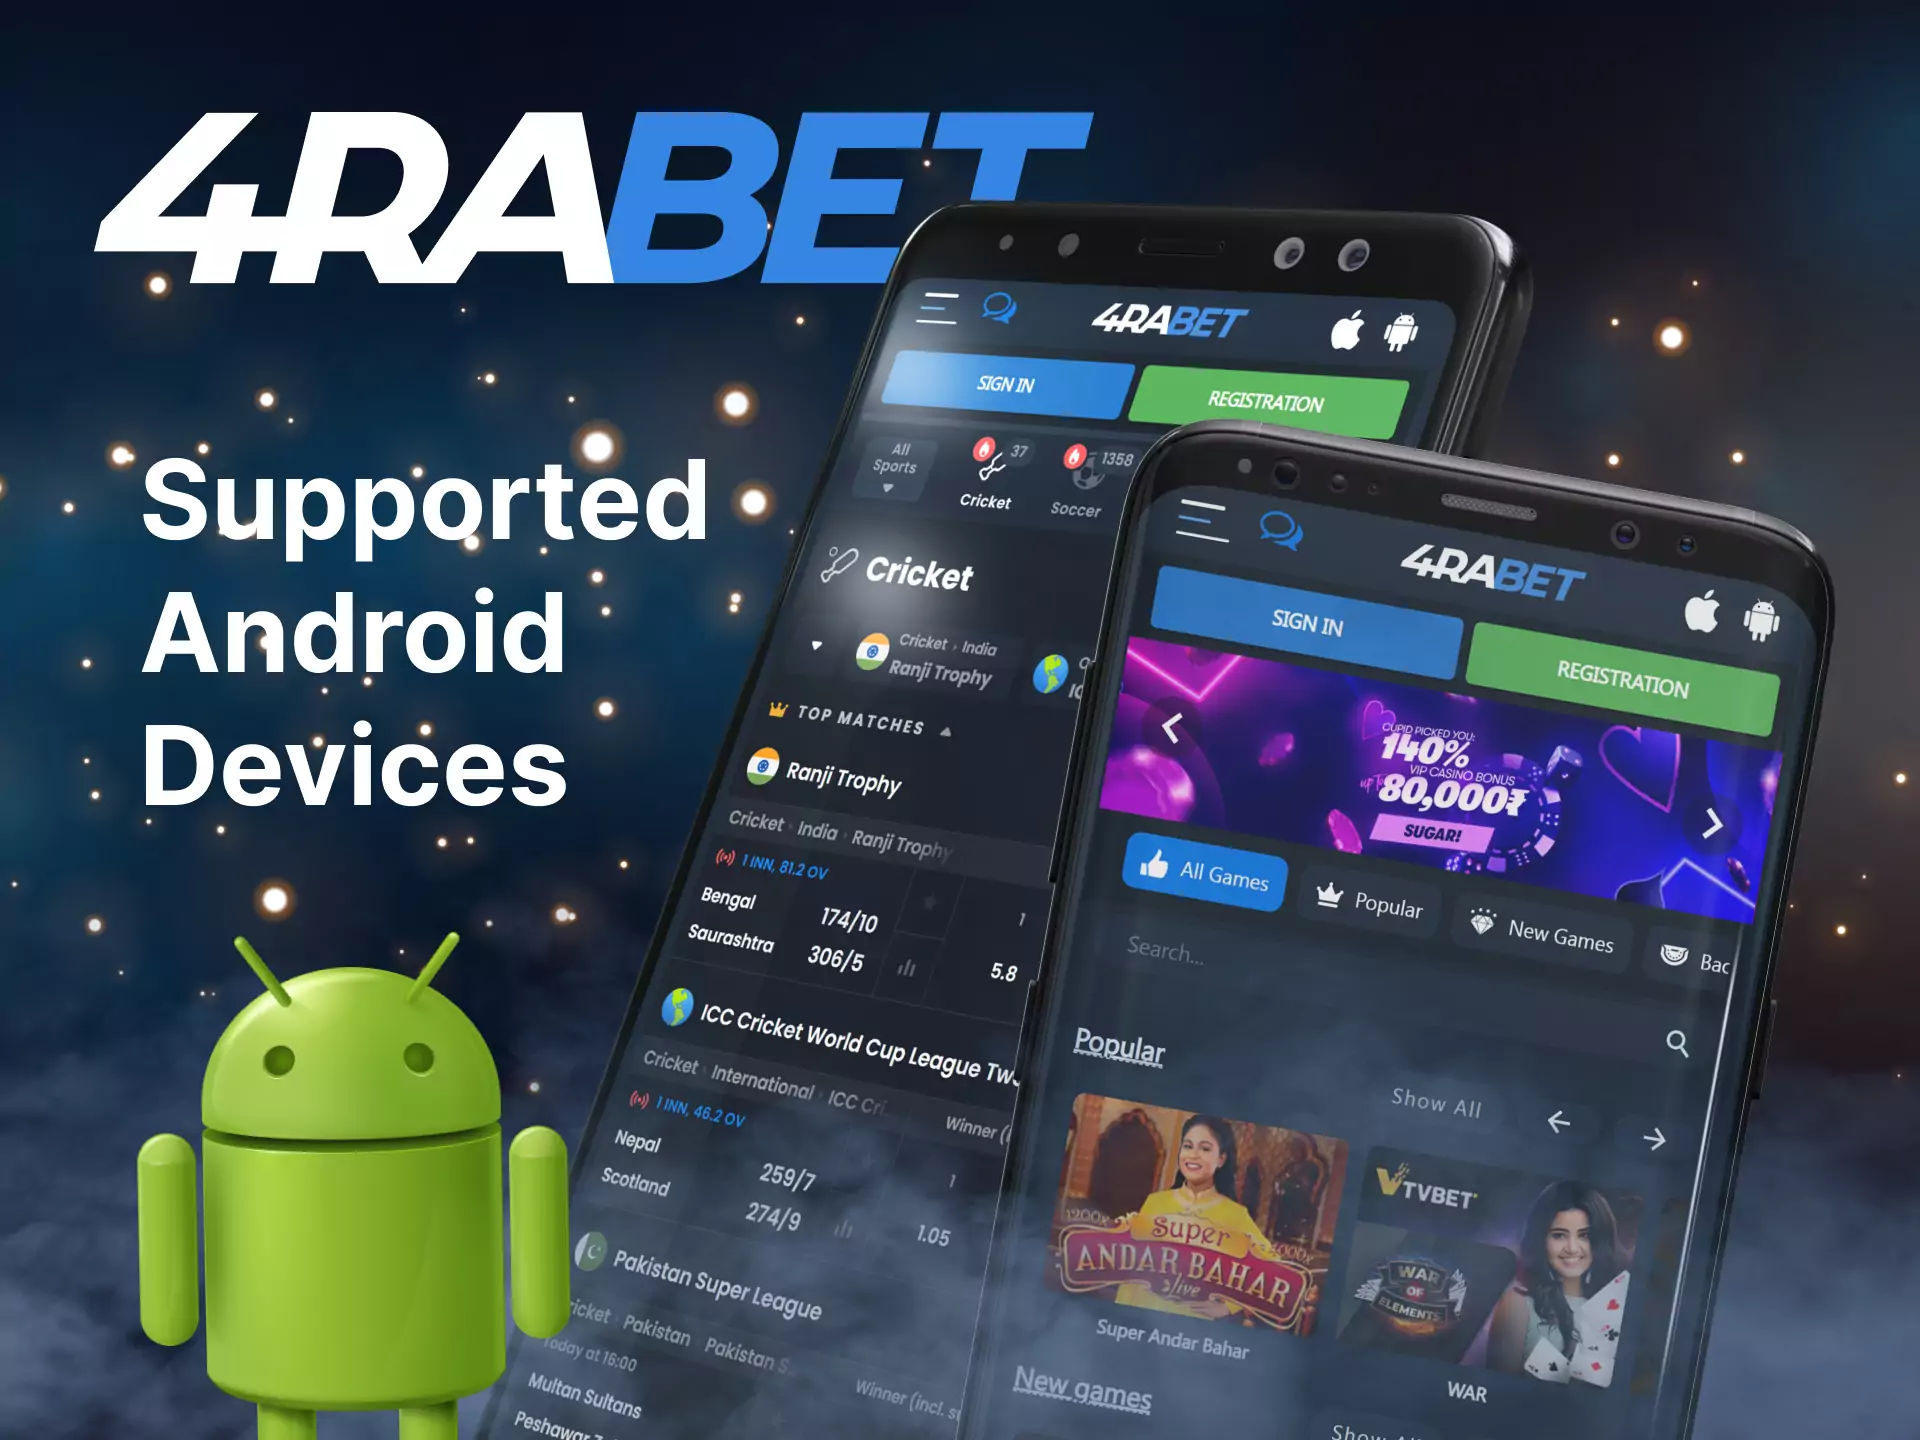 The 4rabet mobile app is supported on many different Android devices.